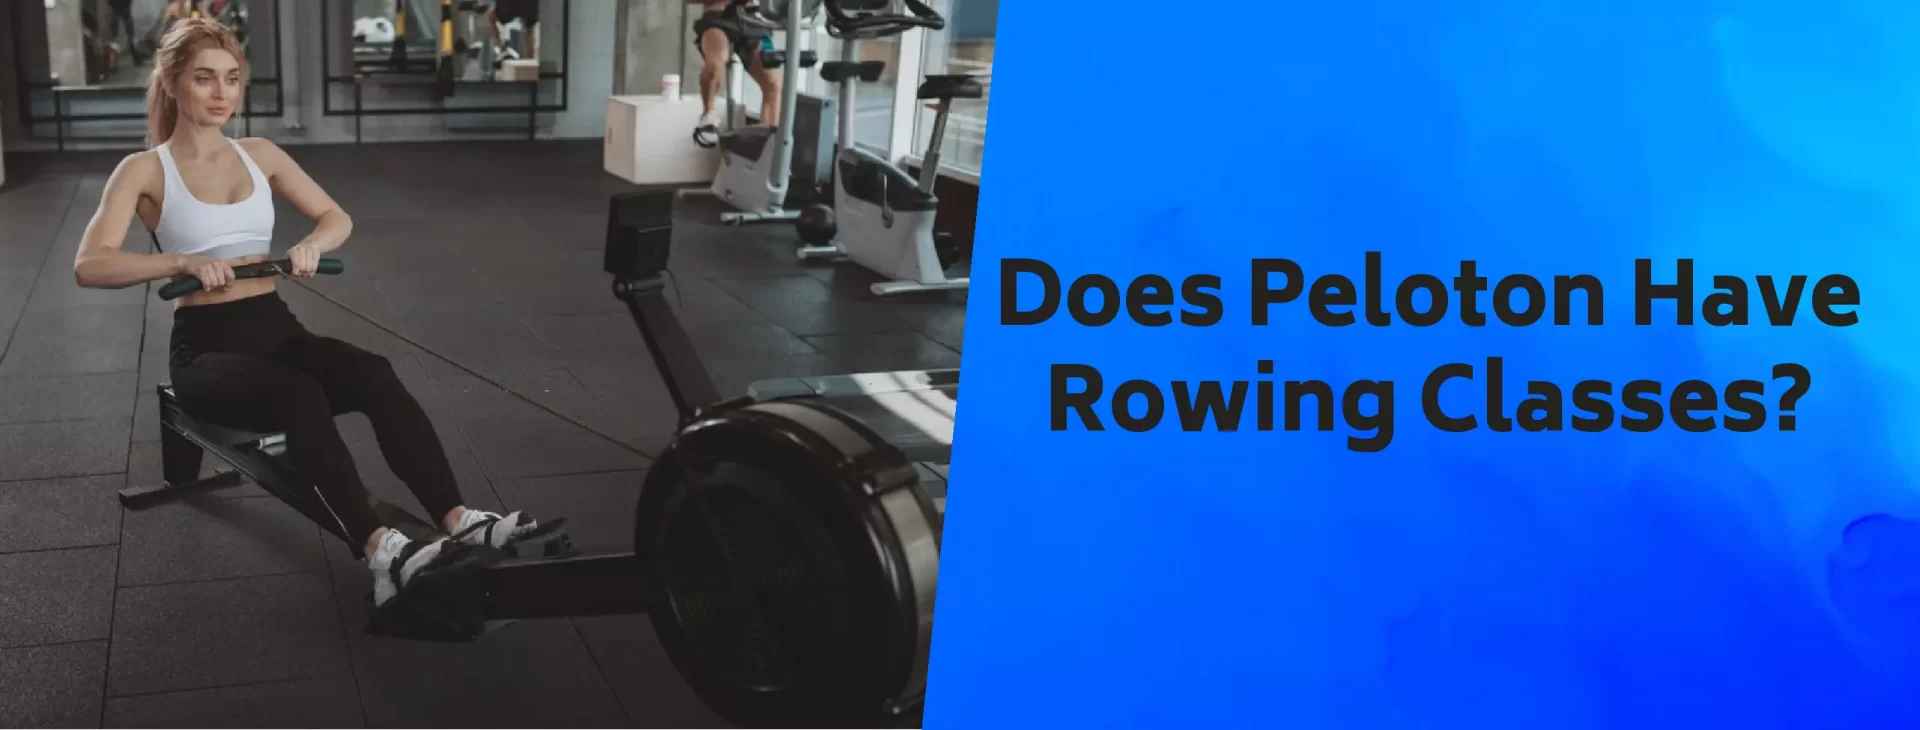 Does Peloton Have Rowing Classes